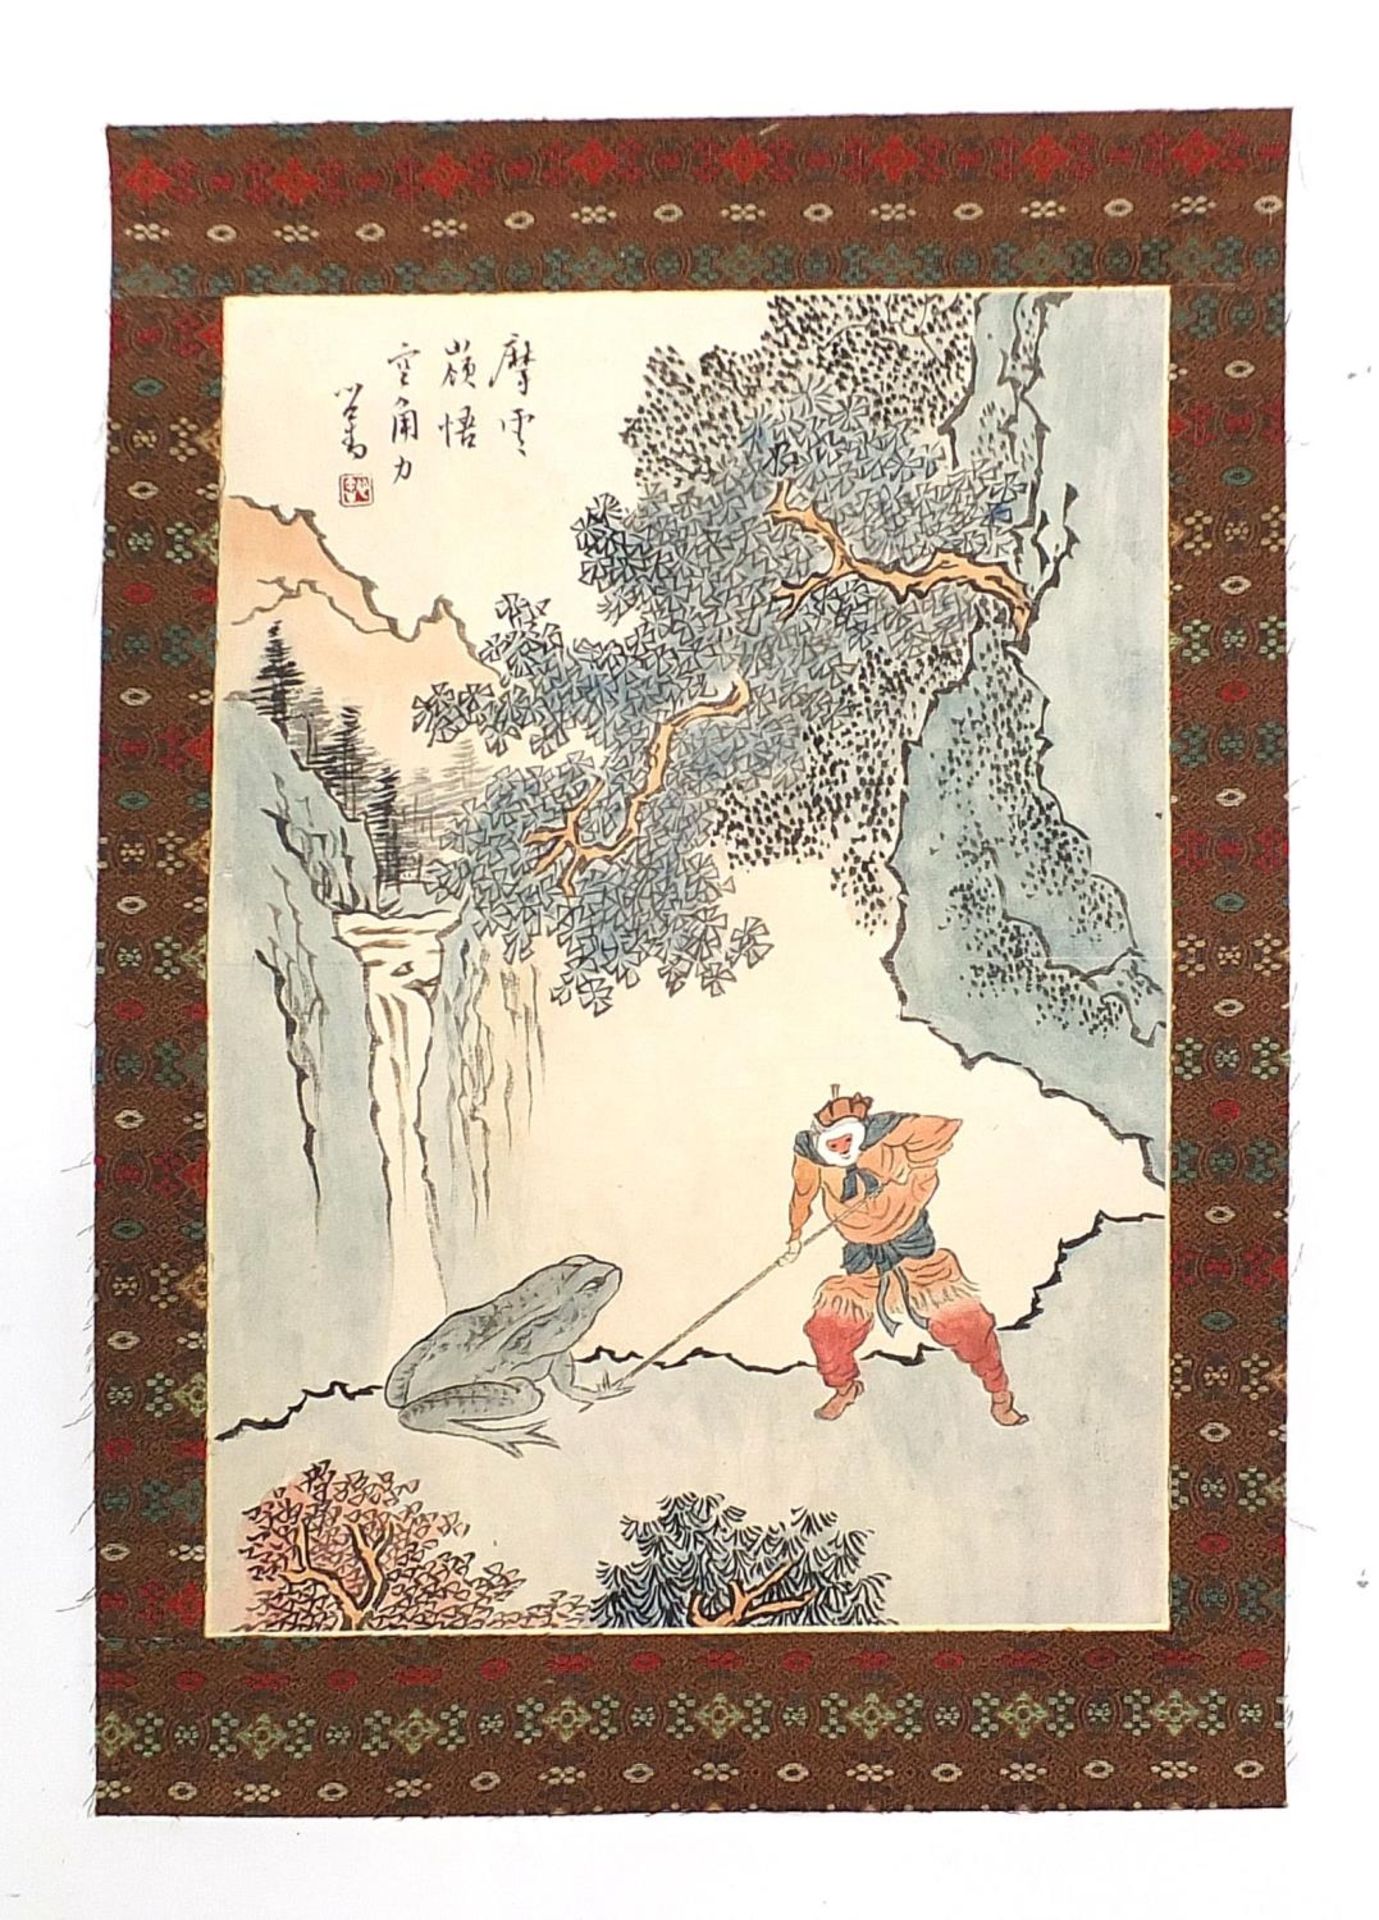 Attributed to Puru - Journey to the West, the monkey king fight with giant toad monster, Chinese ink - Image 2 of 3